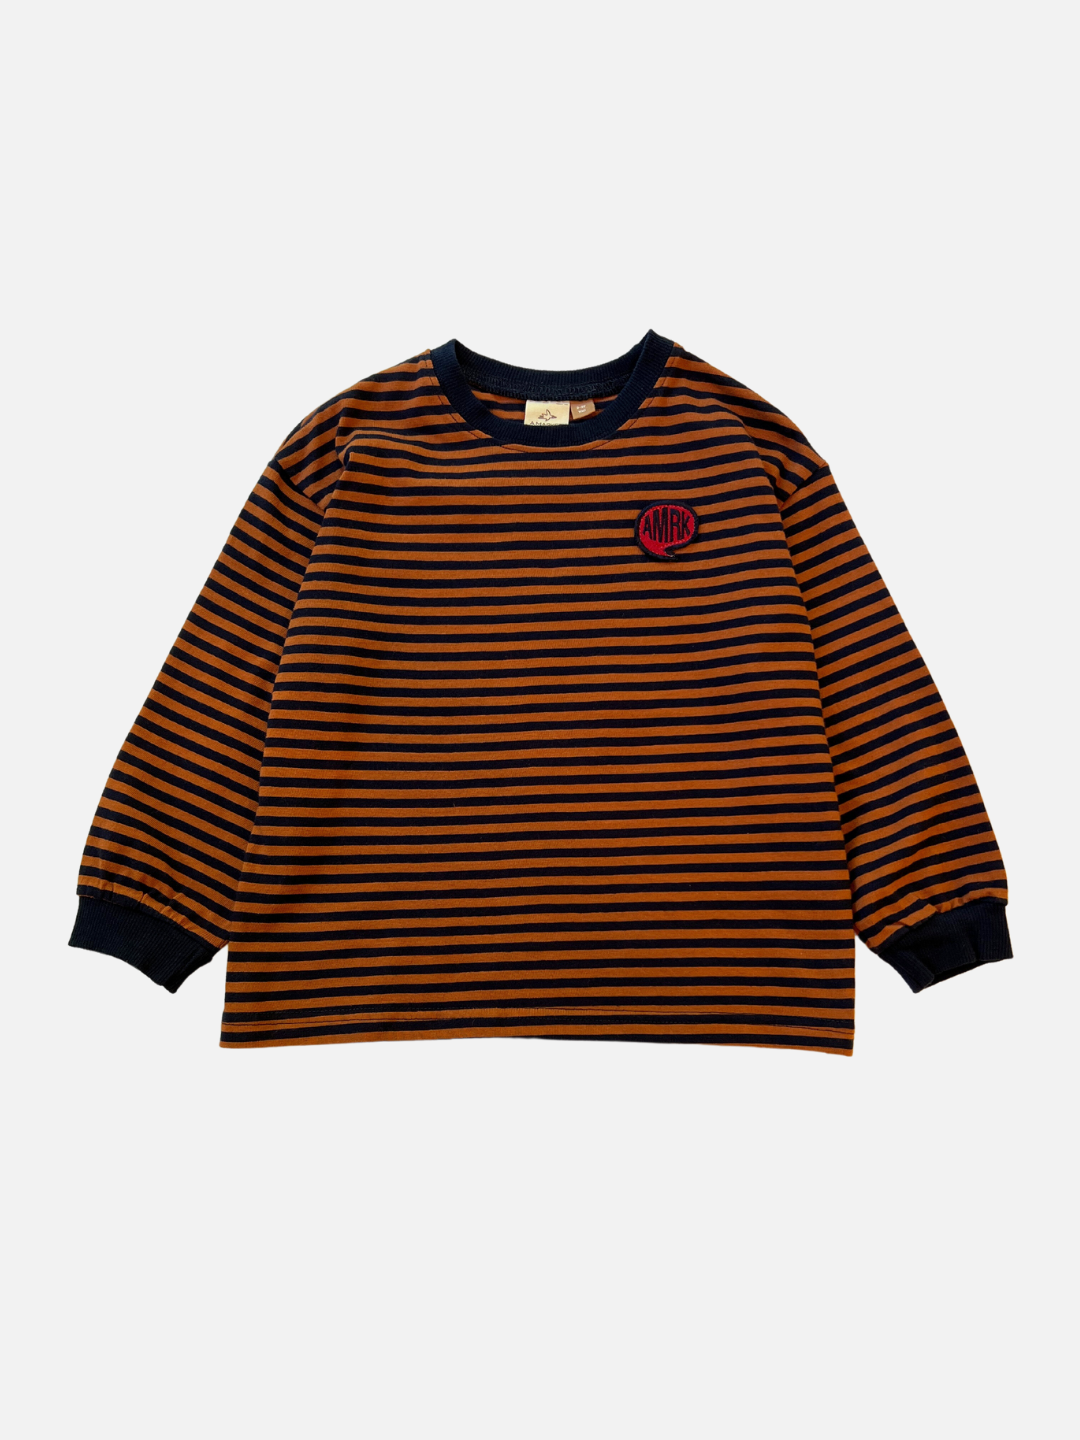 Rust/Navy | Comma Striped Longsleeve in Rust/Navy front view